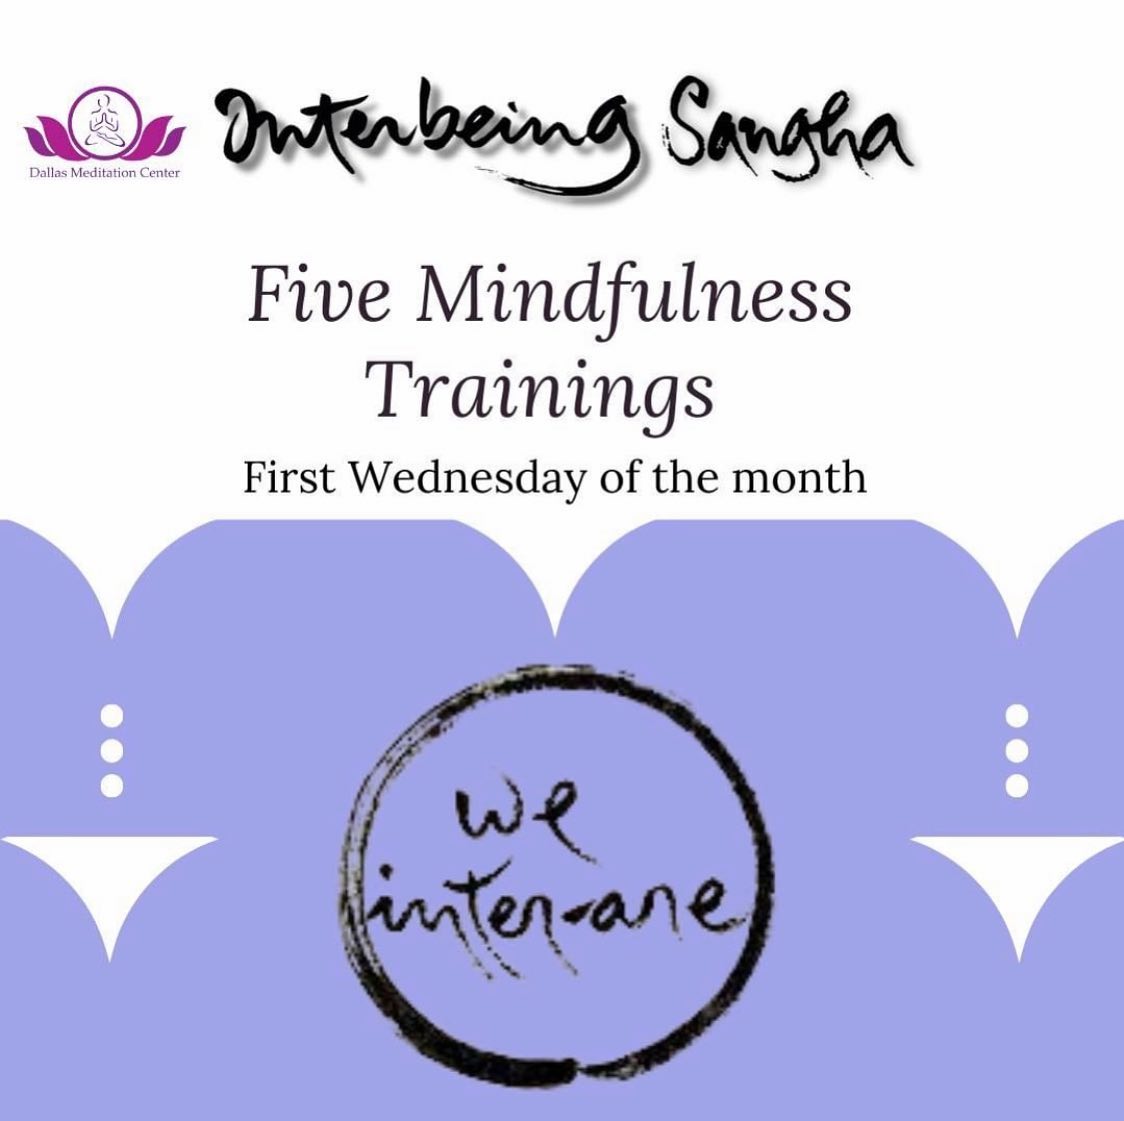 On the first Wednesdays of each month, Interbeing Sangha discusses the #fivemindfulnesstrainings  that were written by Thich Nhat Hanh to present a Buddhist contribution to a global ethic.  Do you wonder why he called them trainings?  Here is what he said:

“The Five Mindfulness Trainings are called trainings because they are something to practice each day, not something we’re expected to do perfectly all the time.  They are there to remind us of our aspirations and our commitment.  Practicing them, we continue to learn and to deepen our practice and our understanding.”

Weekly Interbeing Meditation Group Link: https://dallasmeditationcenter.com/event/interbeing-sangha-and-earth-holder-sangha/